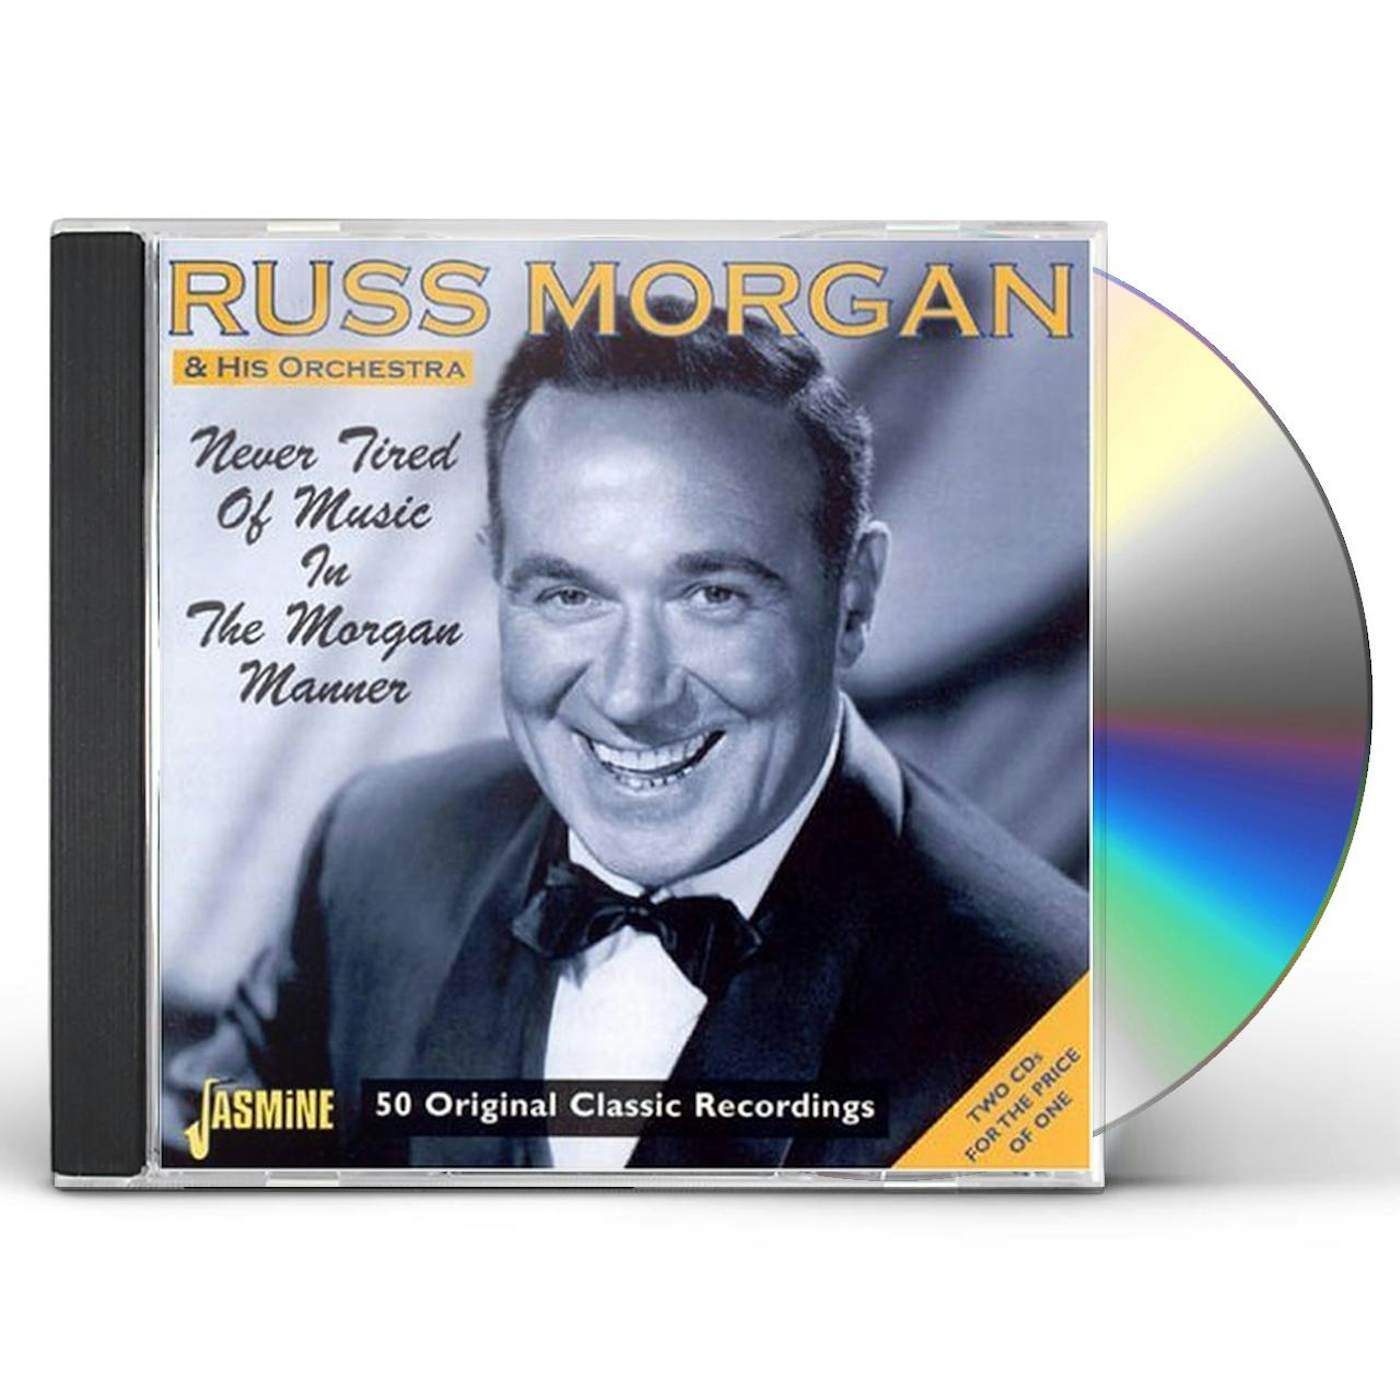 Russ Morgan NEVER TIRED OF MUSIC IN THE MORGAN MANNER CD